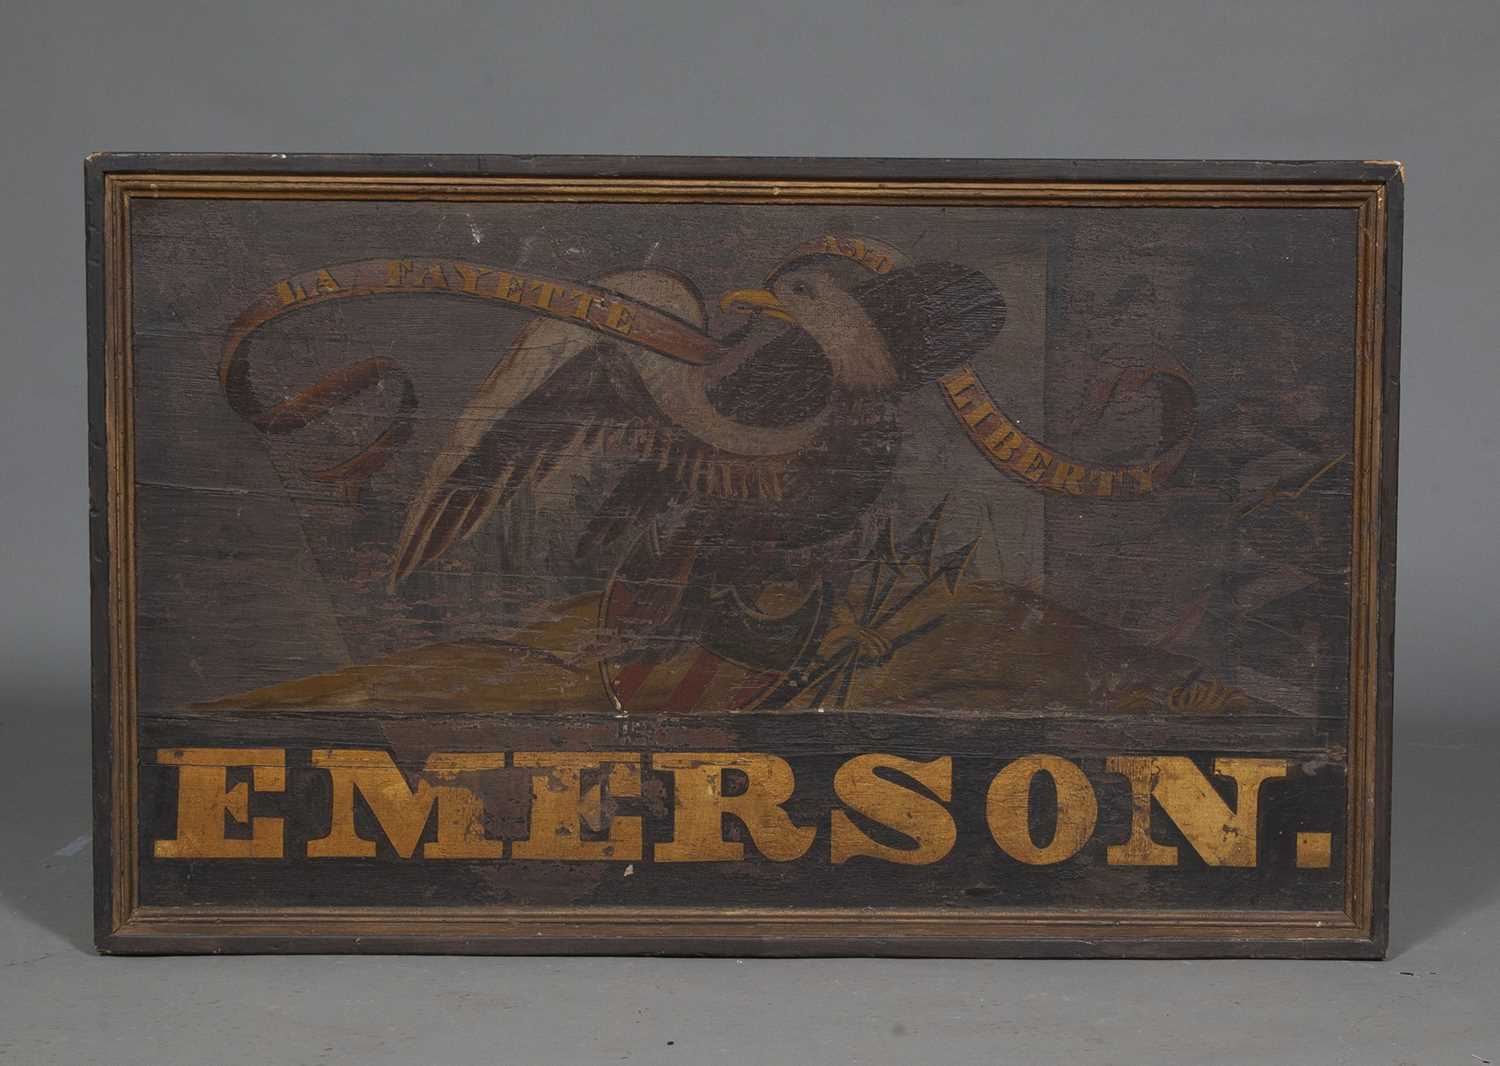 Lot 187 - Painted Wood "Emerson" Trade Sign